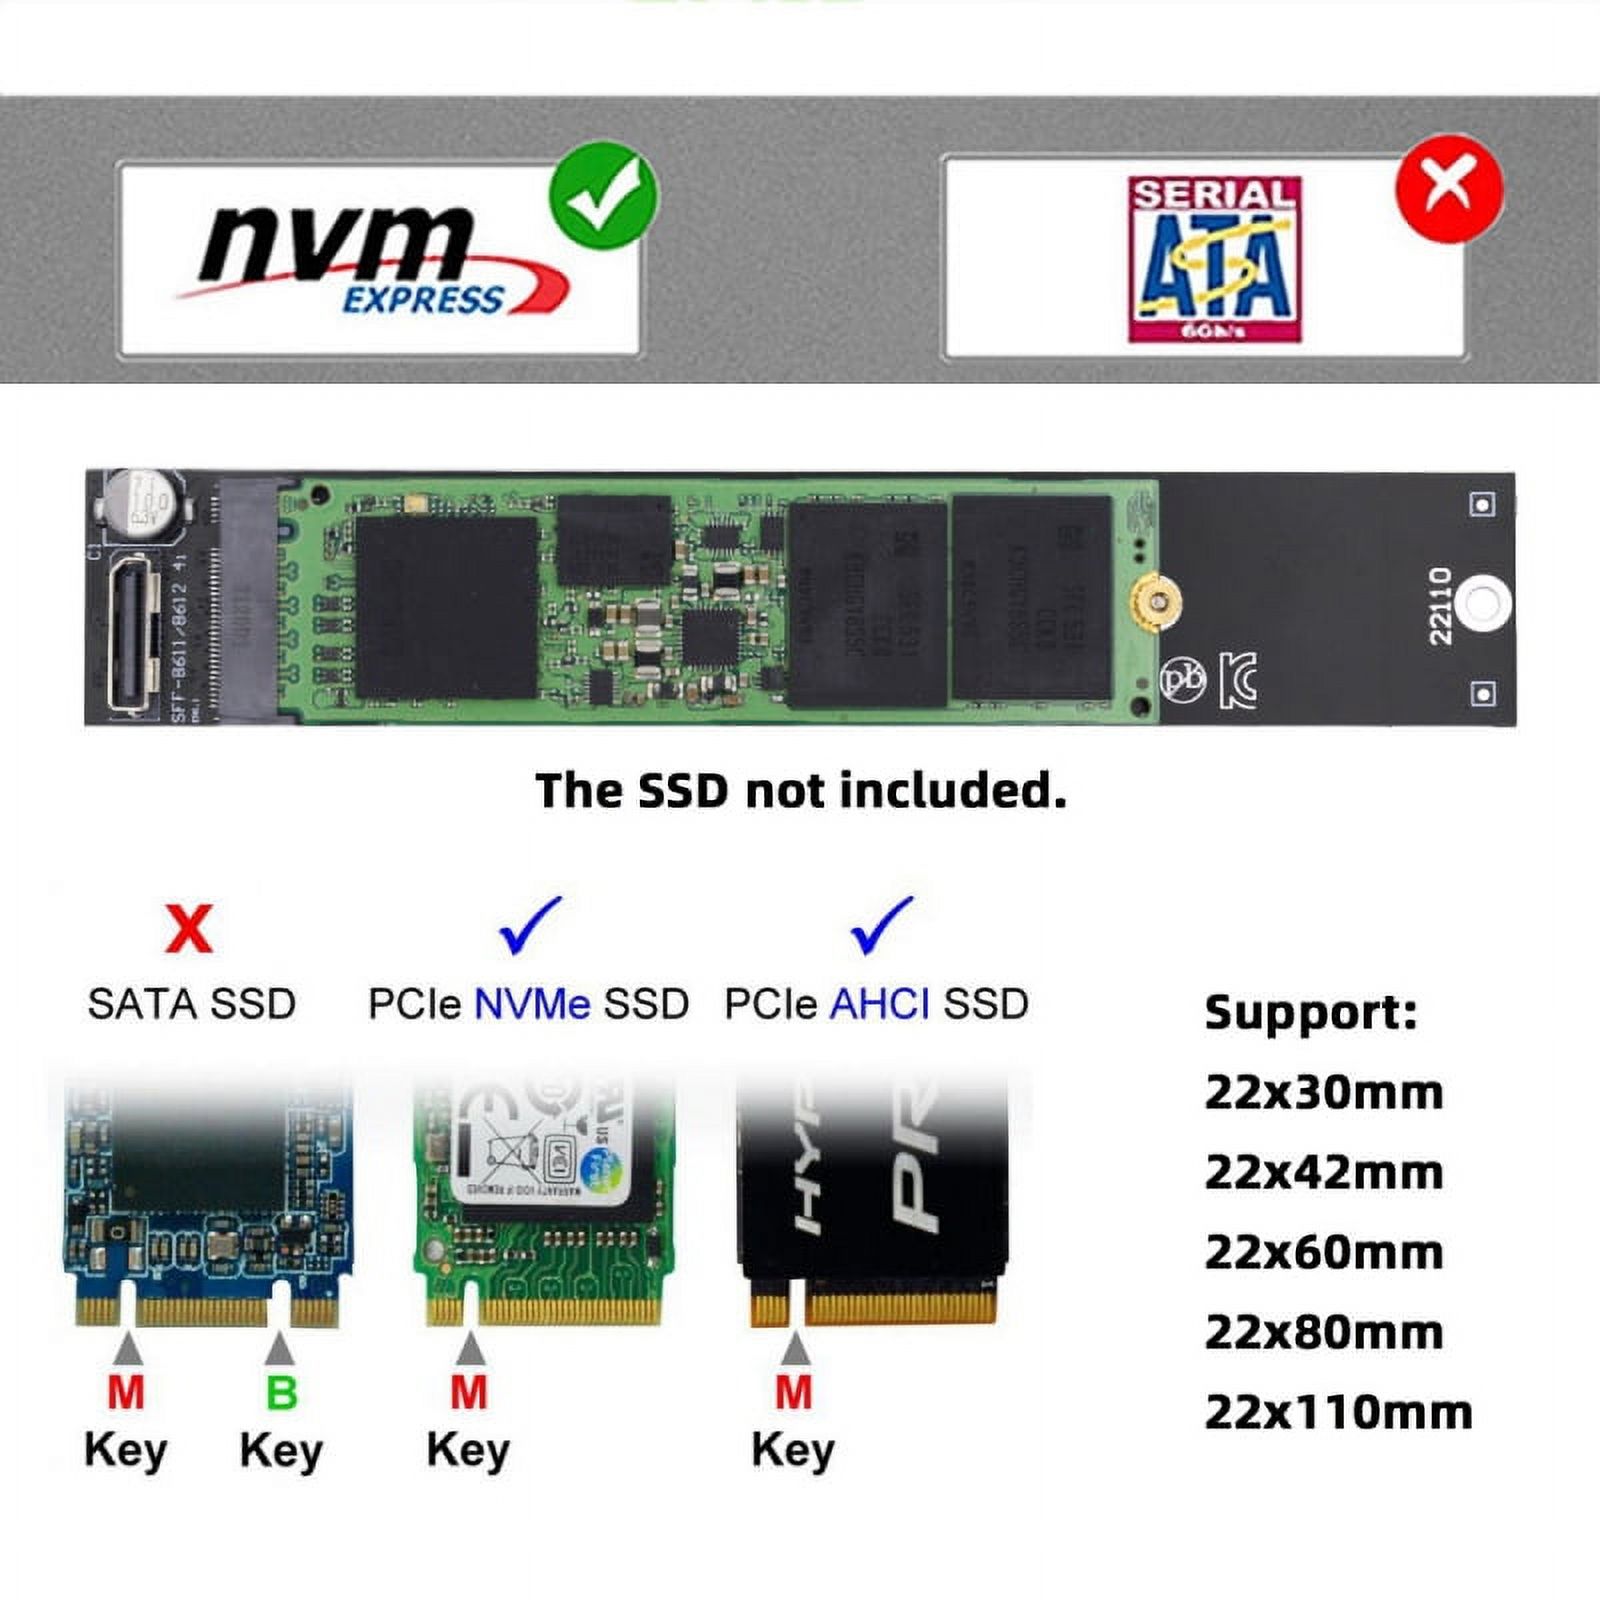 JSER Oculink SFF-8612 SFF-8611 to M.2 Kit NGFF M-Key to NVME PCIe SSD 2280 22110mm Adapter for Mainboard - image 2 of 7